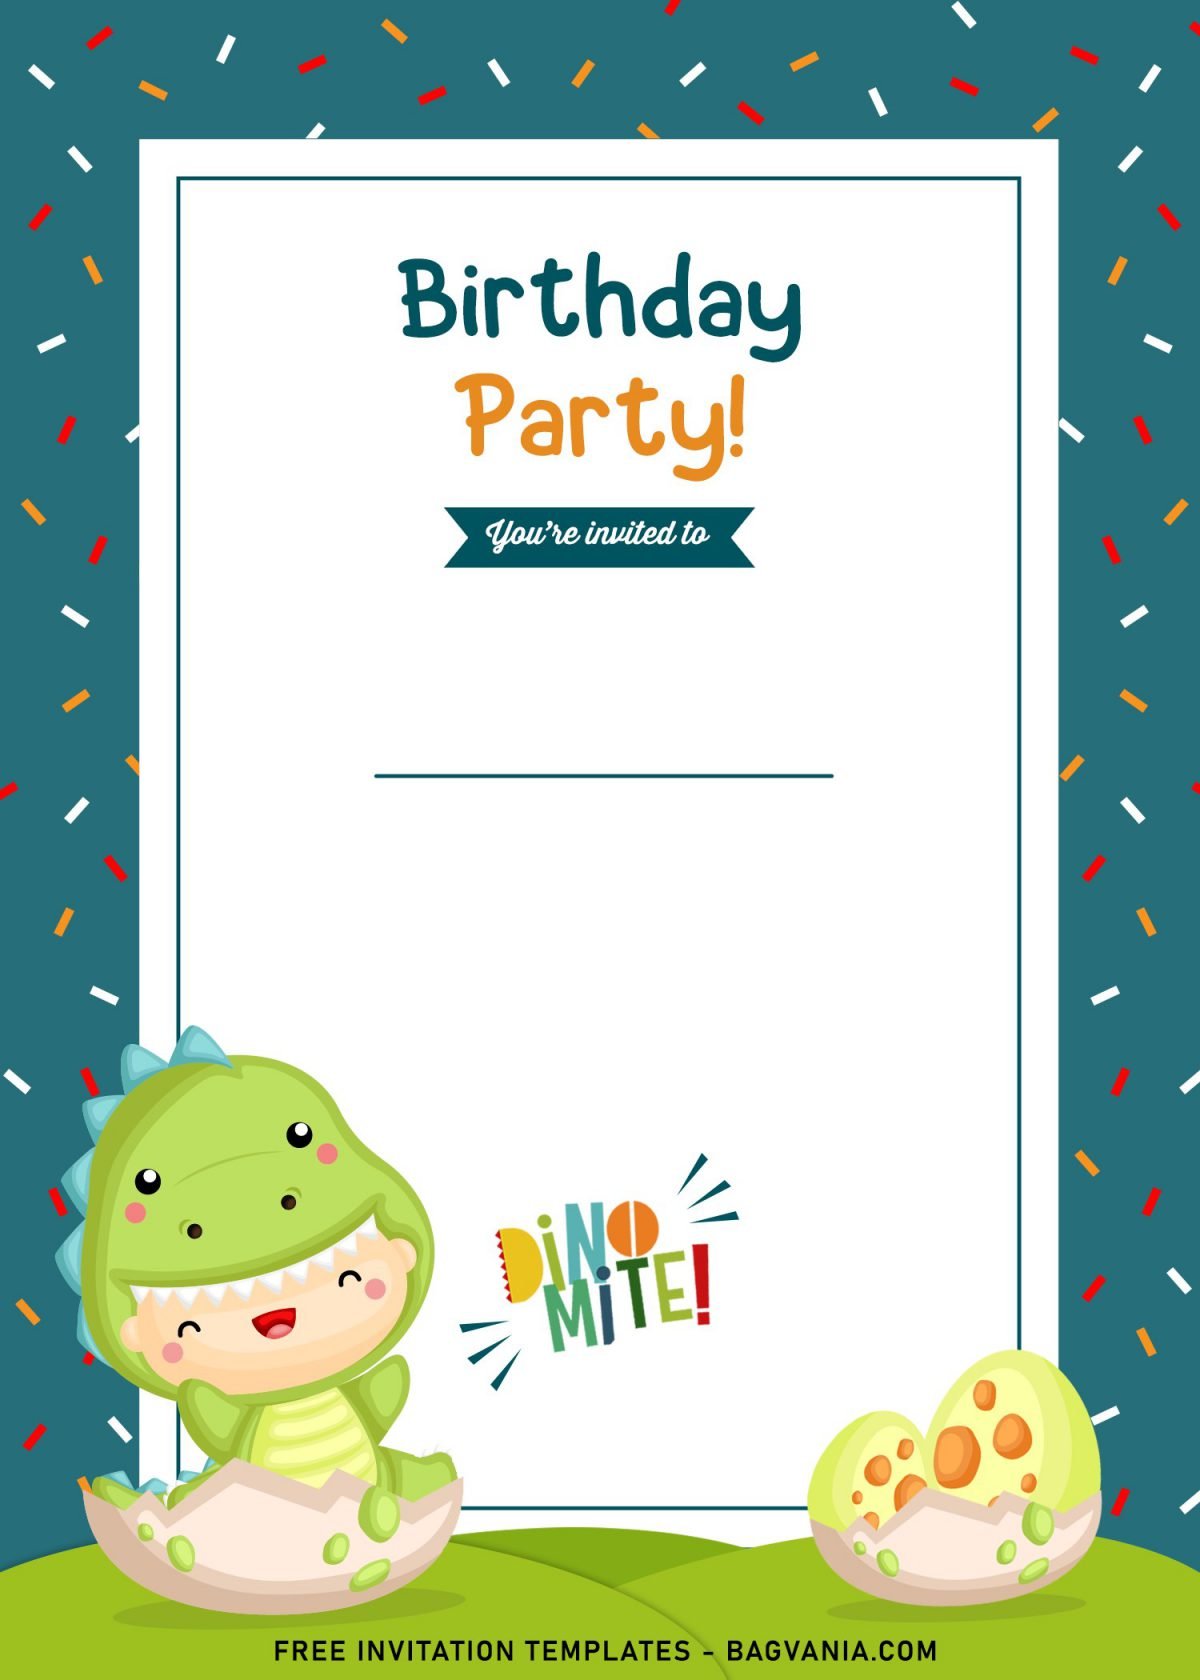 9+ Awesome Dino Party Birthday Invitation Templates and has White rectangle shaped text box